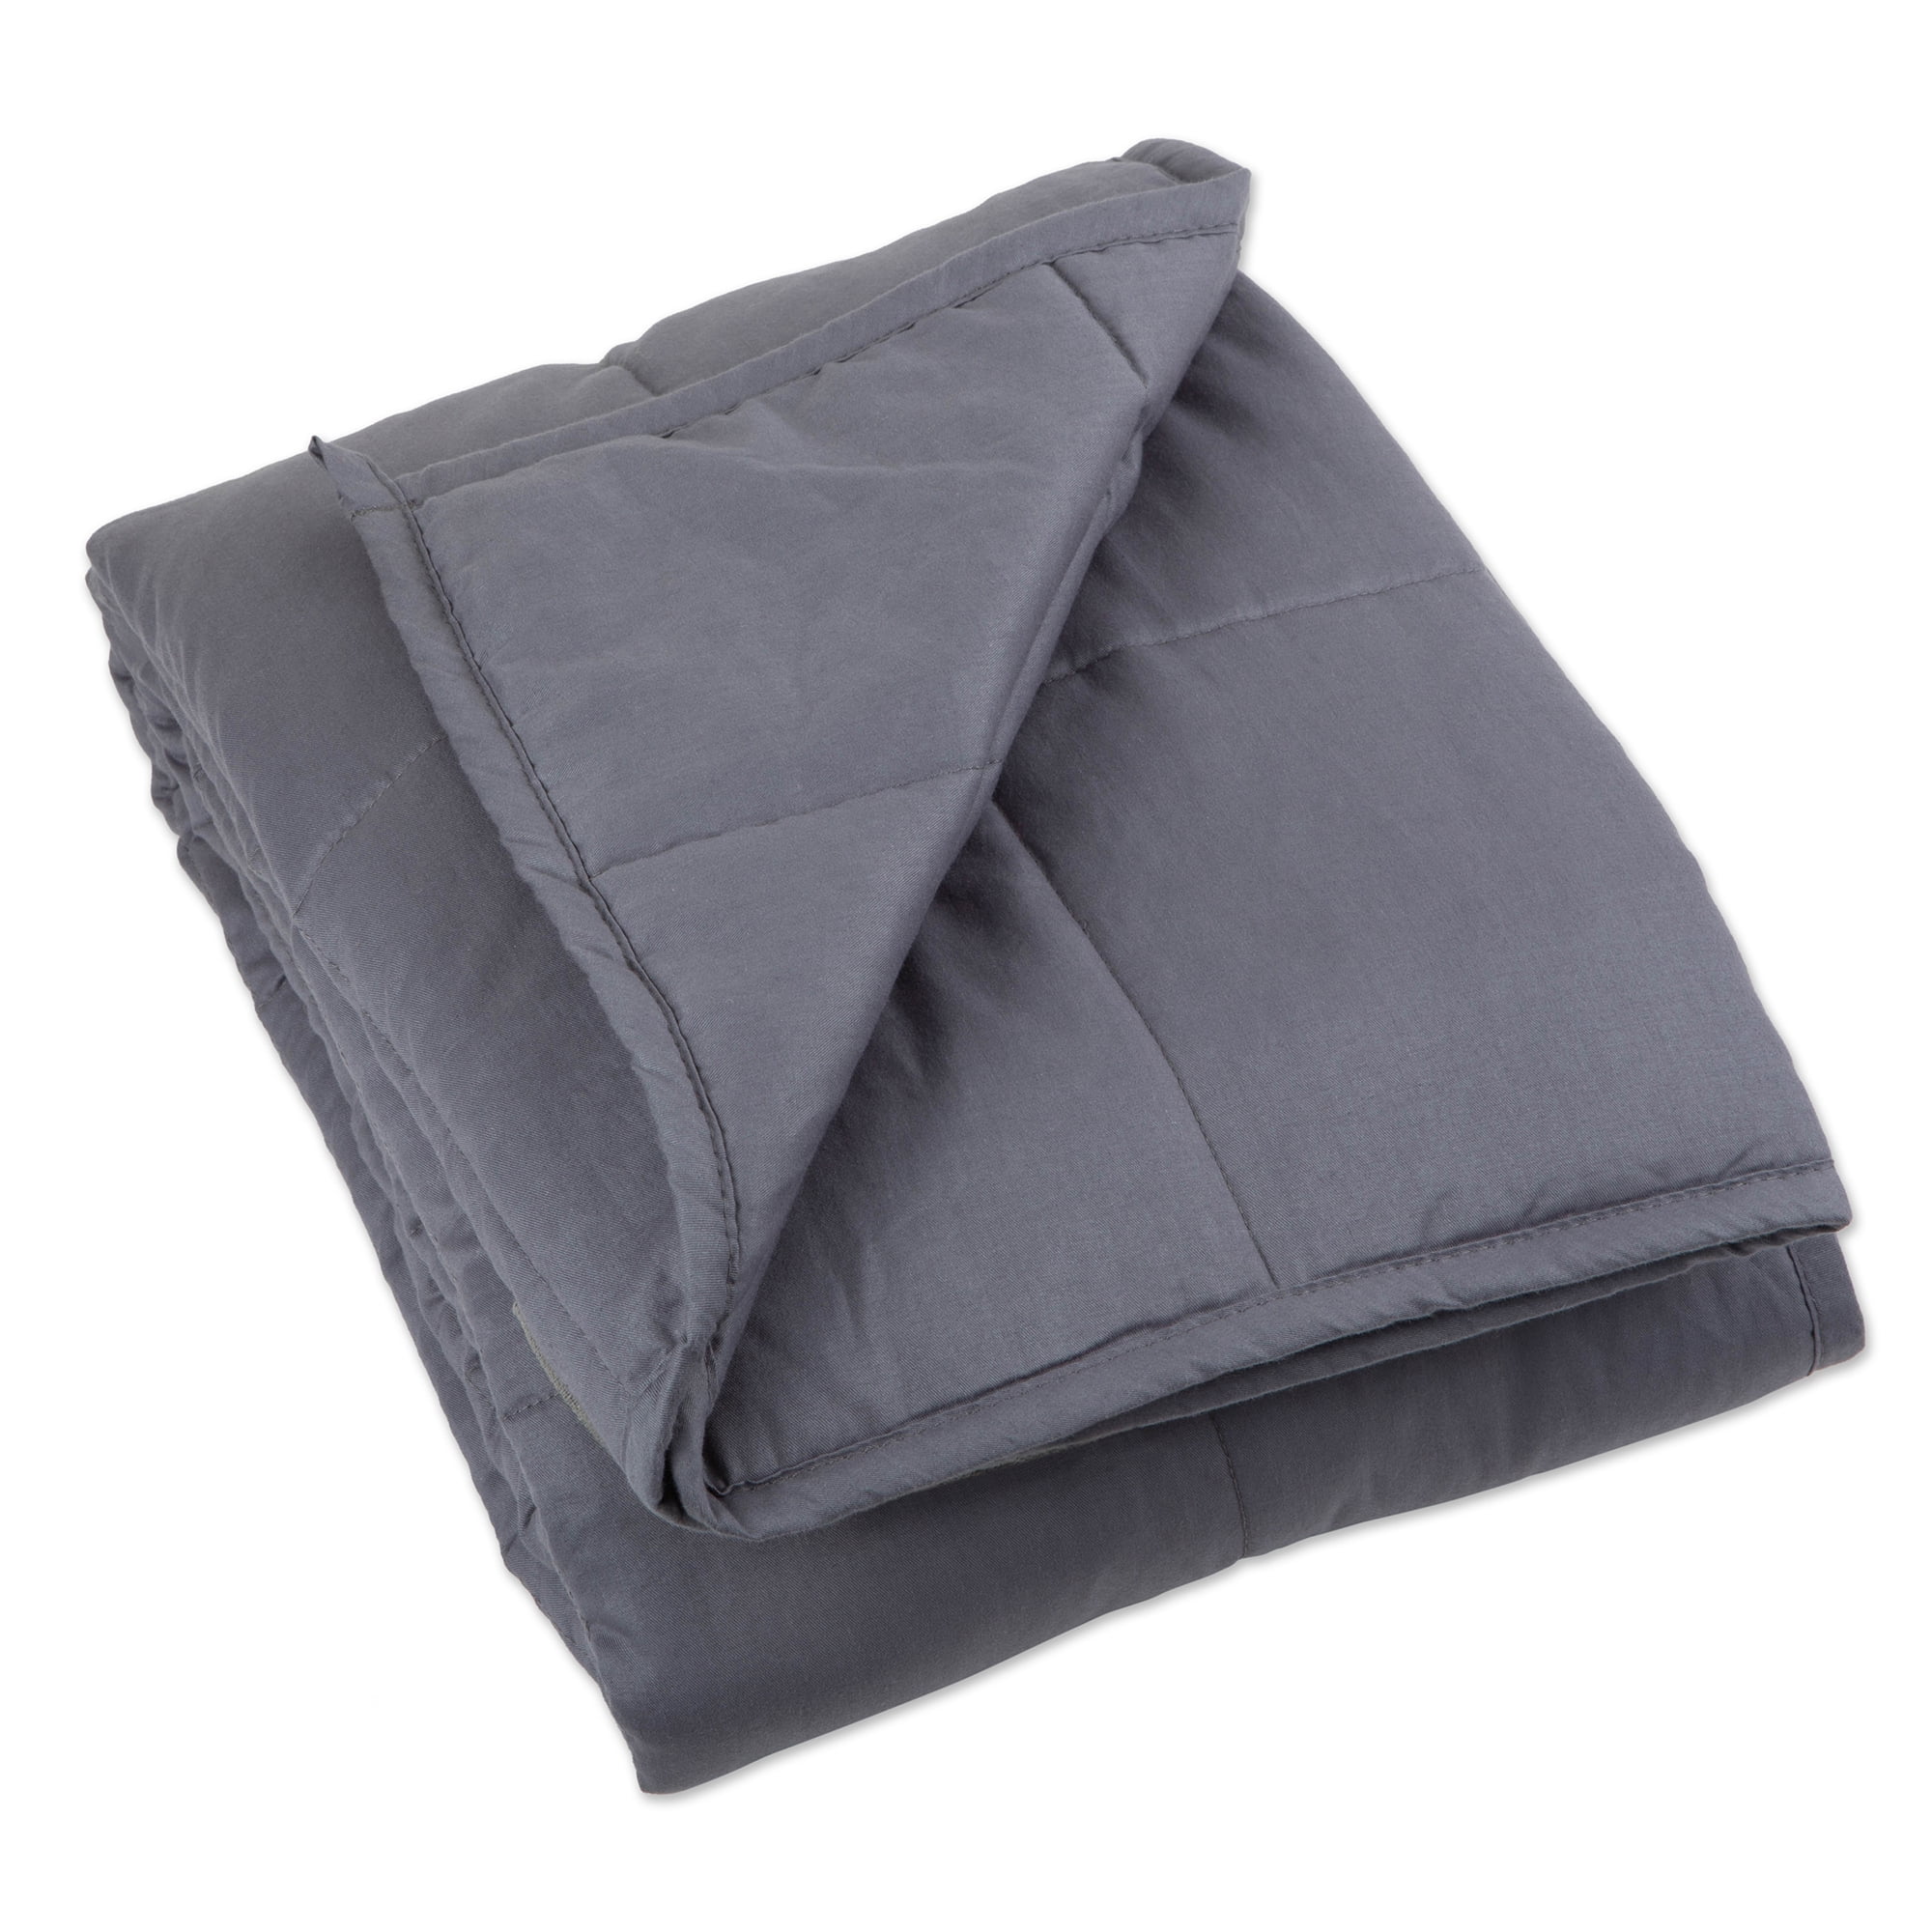 Bucky Weighted Blanket, Fits Full Sized Bed, Gray - 48"x72", 12lbs